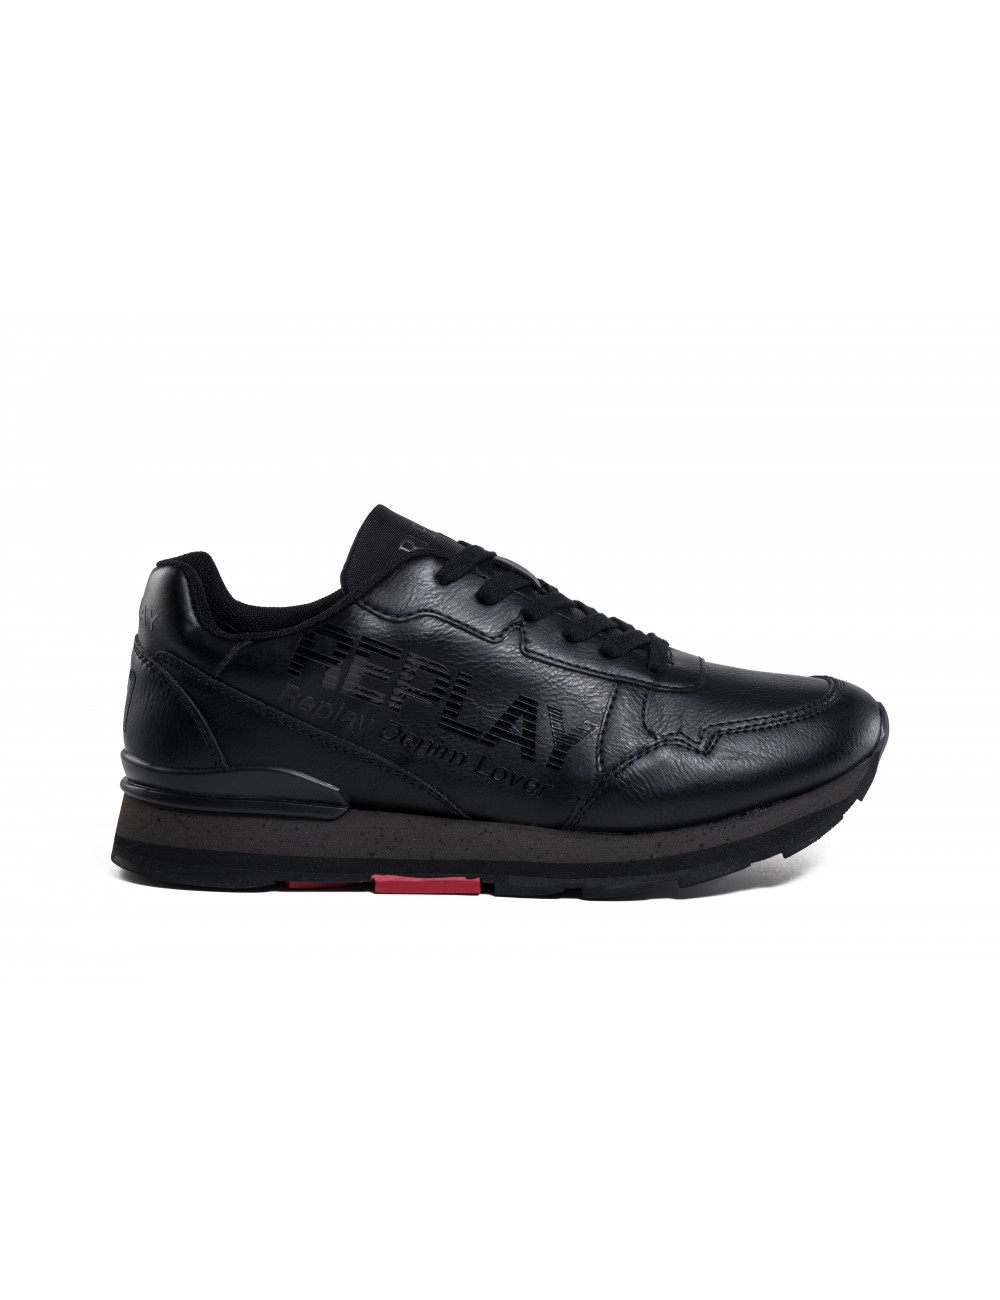 REPLAY, Black Men's Laced Shoes